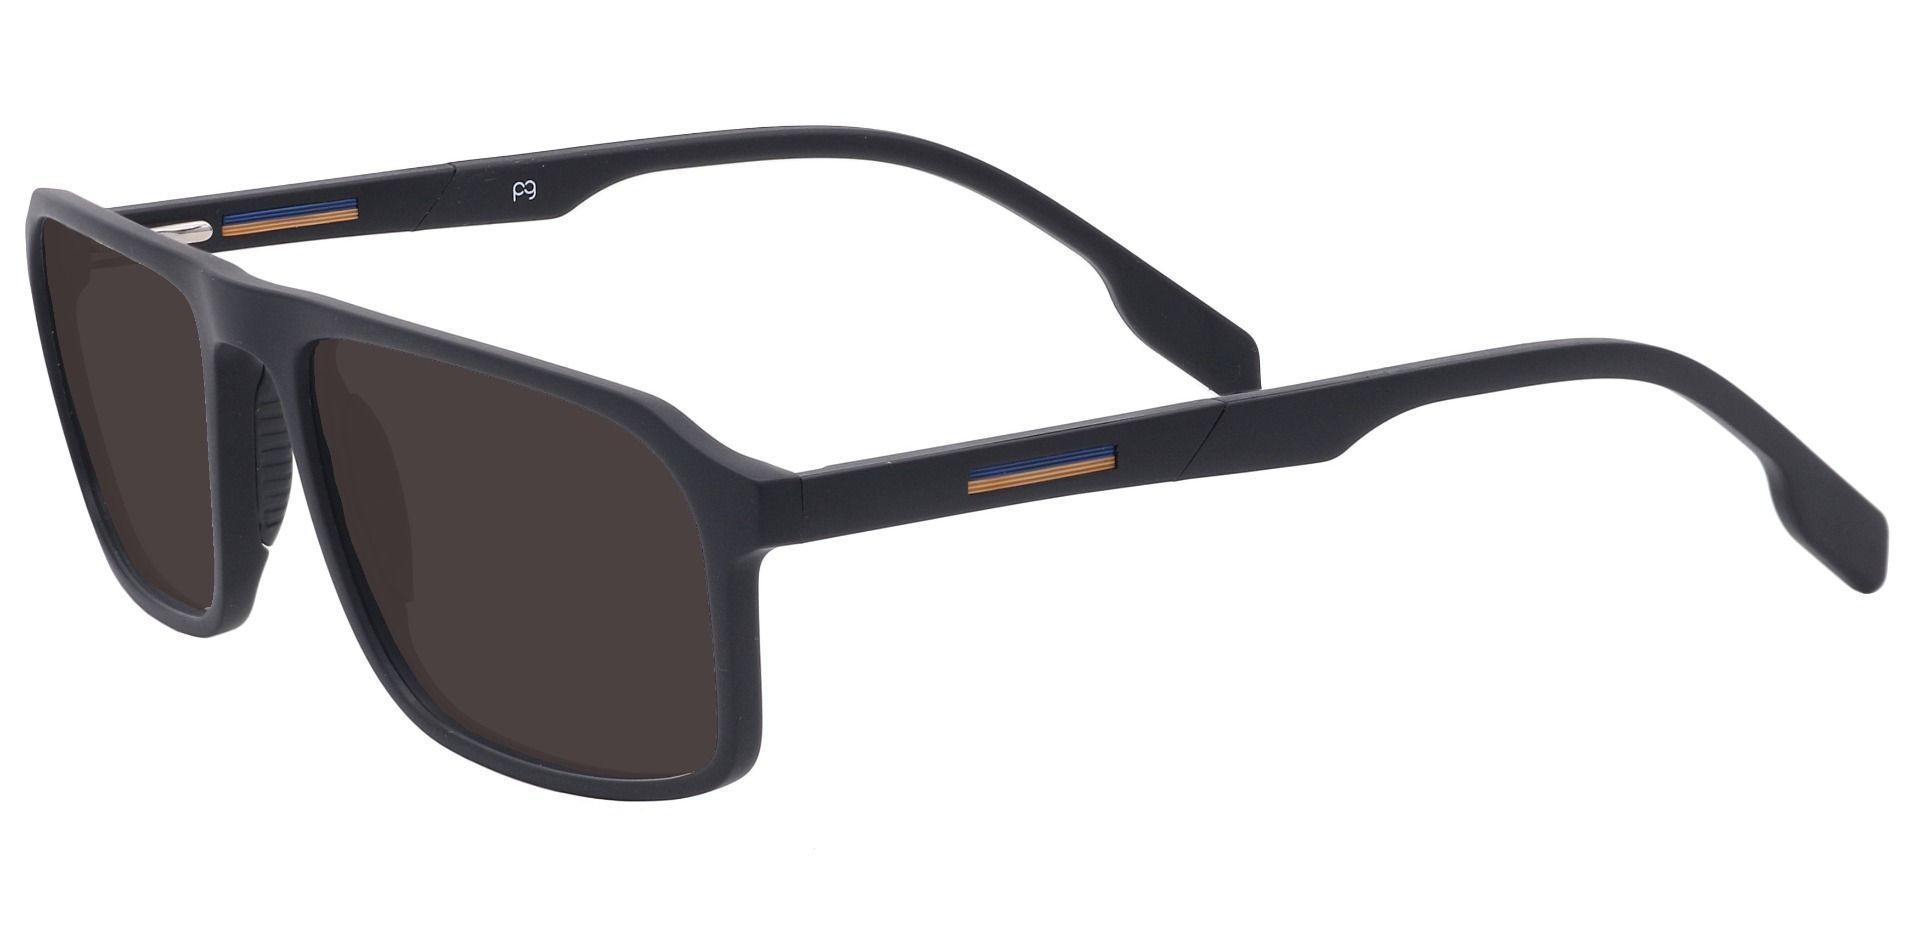 Hector Rectangle Reading Sunglasses - Black Frame With Gray Lenses